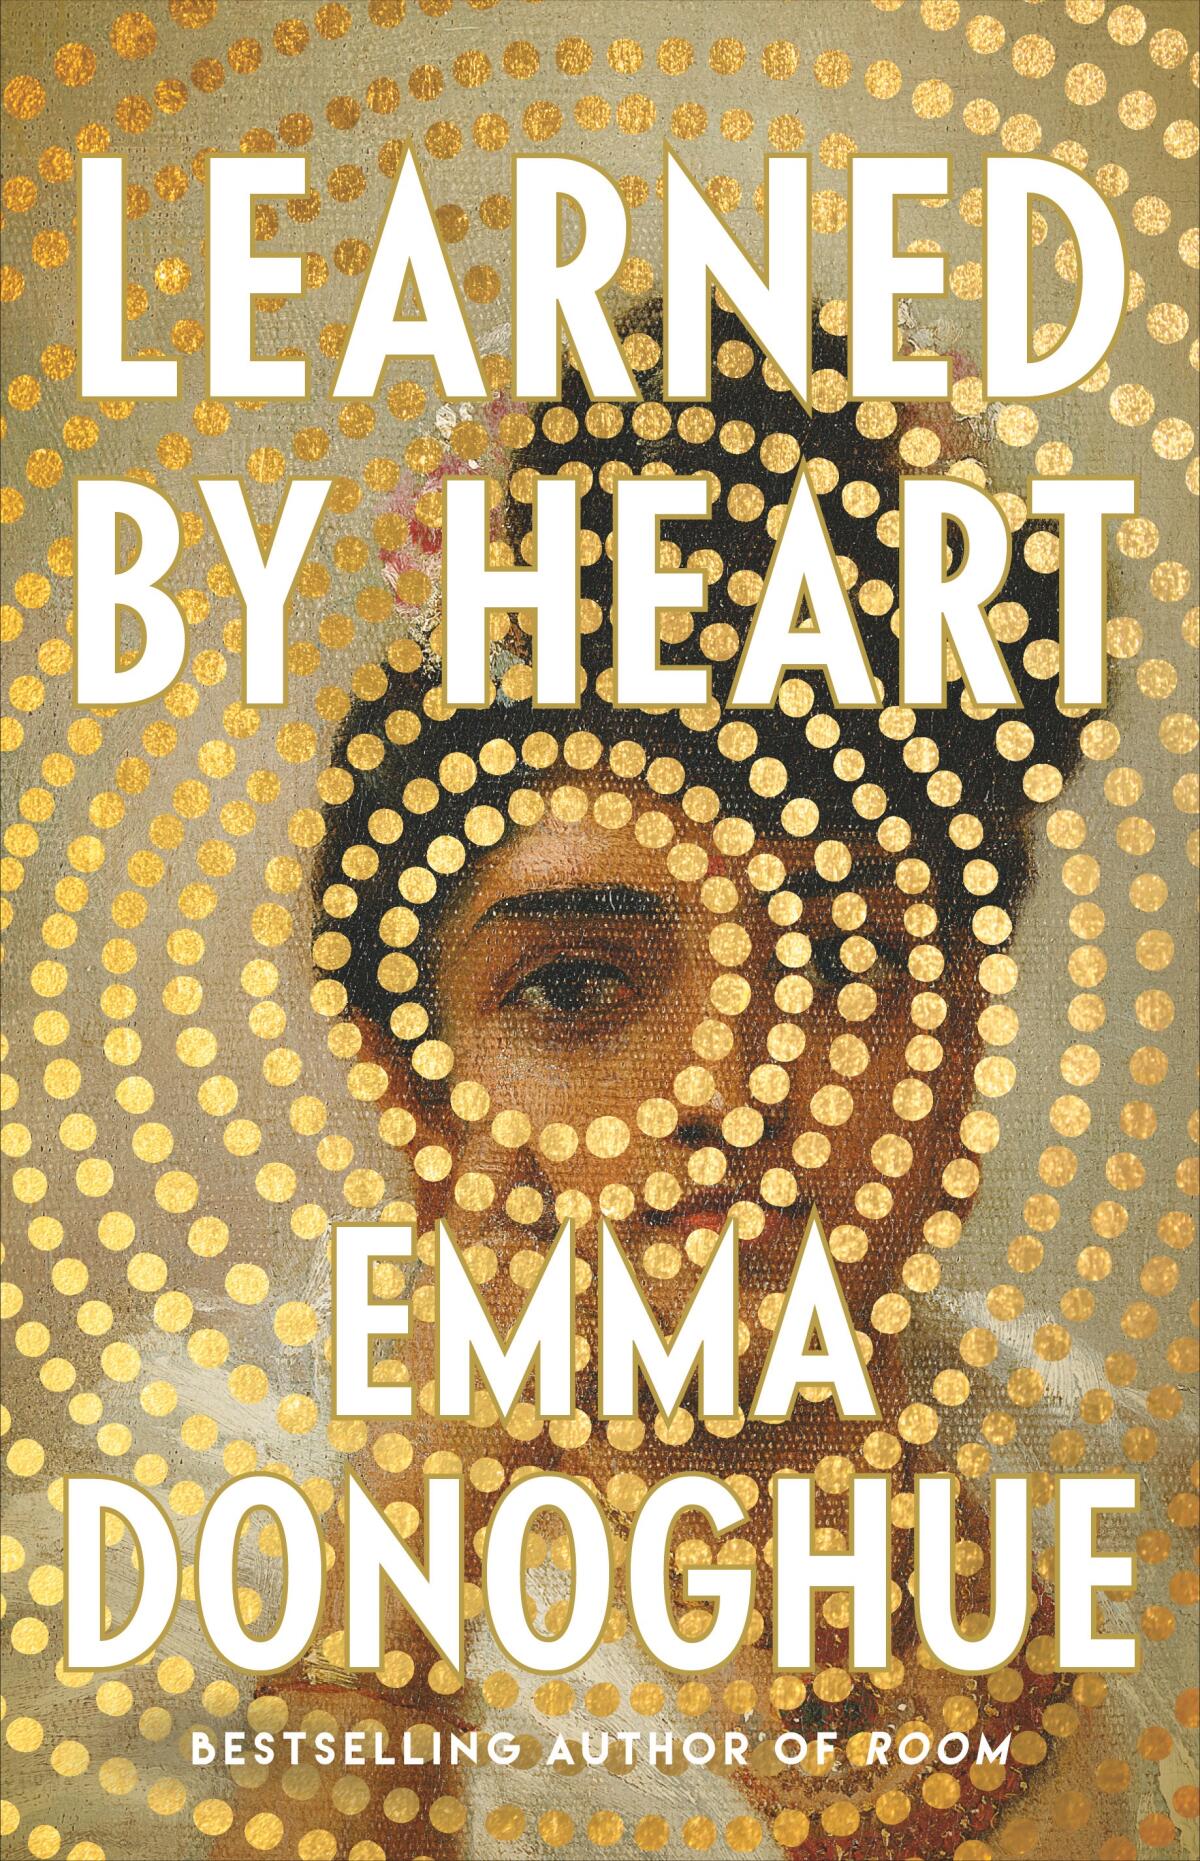 The cover of "Learned by Heart" by Emma Donoghue, featuring an illustration of a woman with circles spreading from her eye.